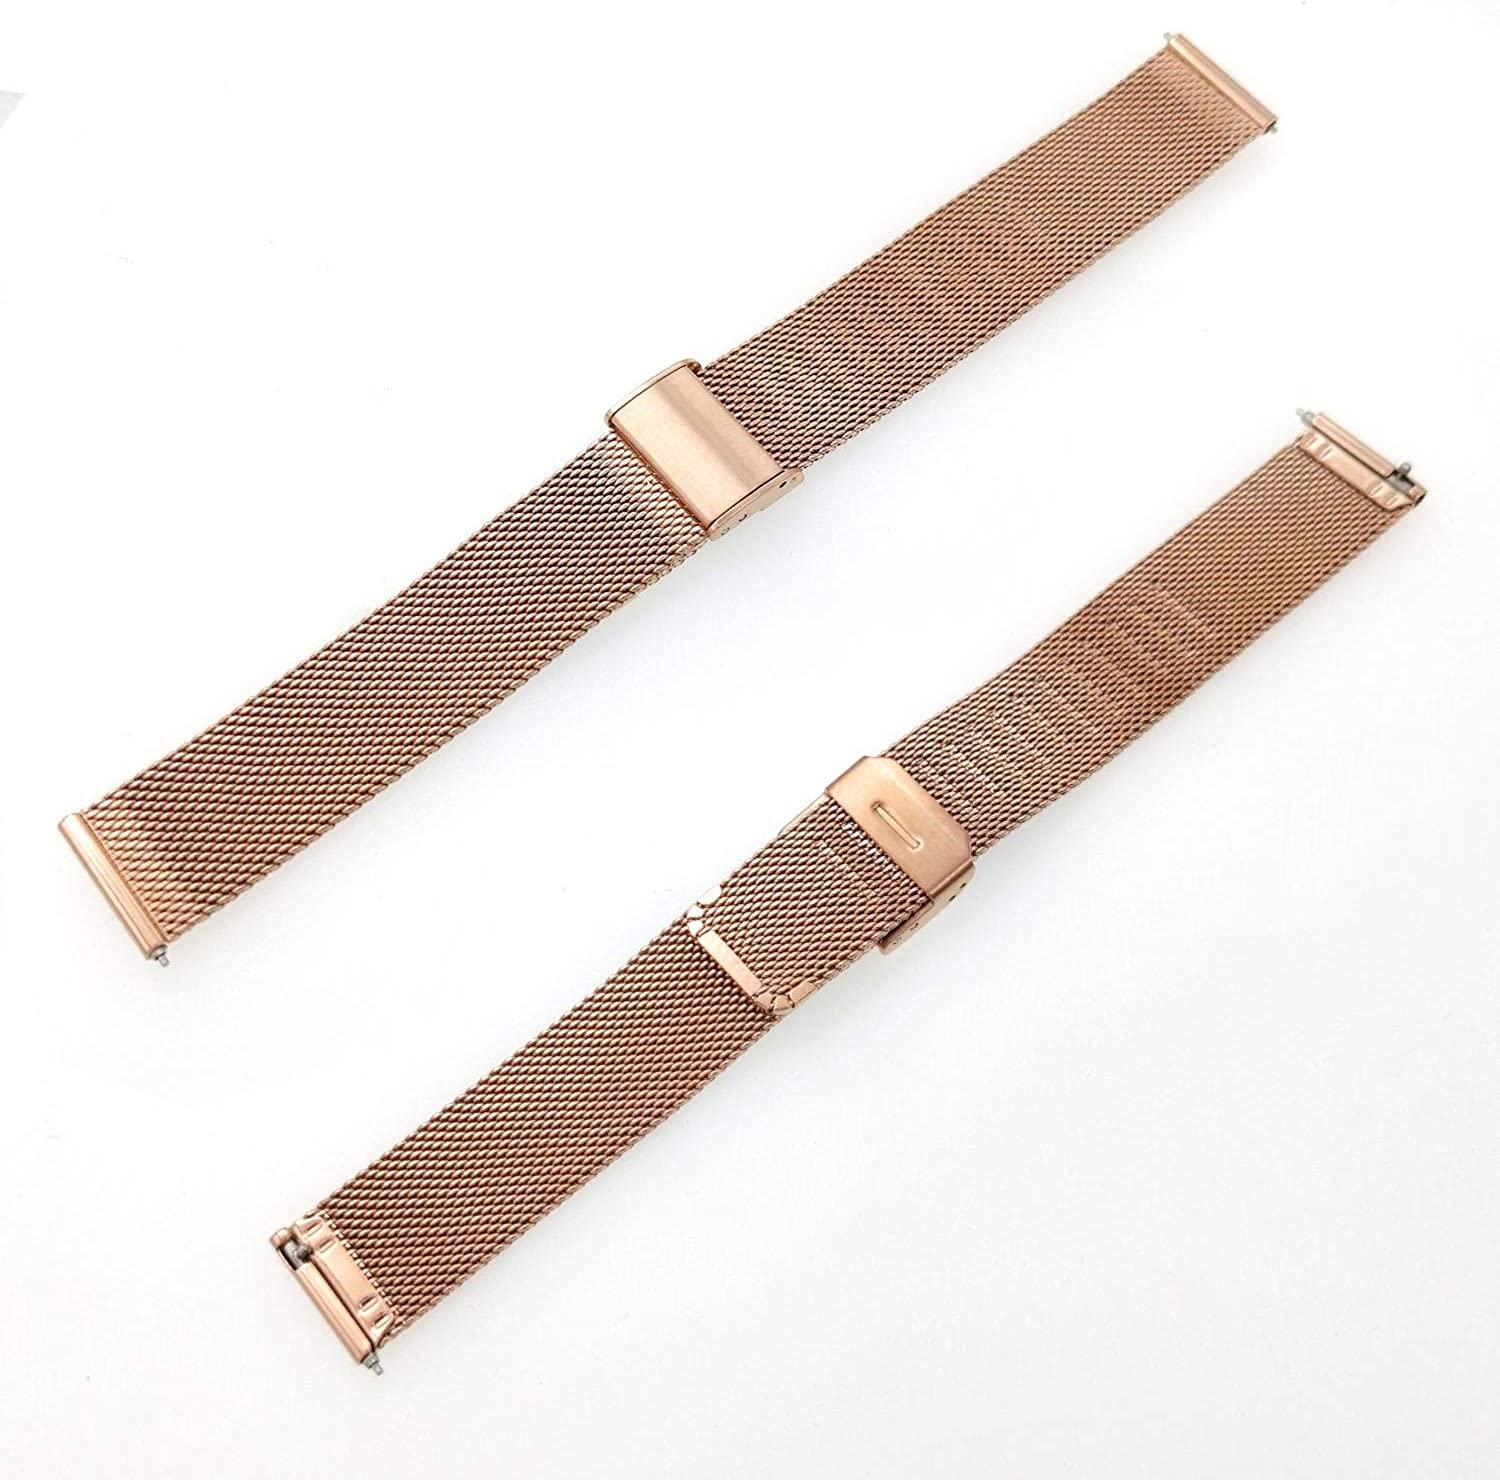  18mm Stainless Steel Watch Bands for Garmin Venu 2S